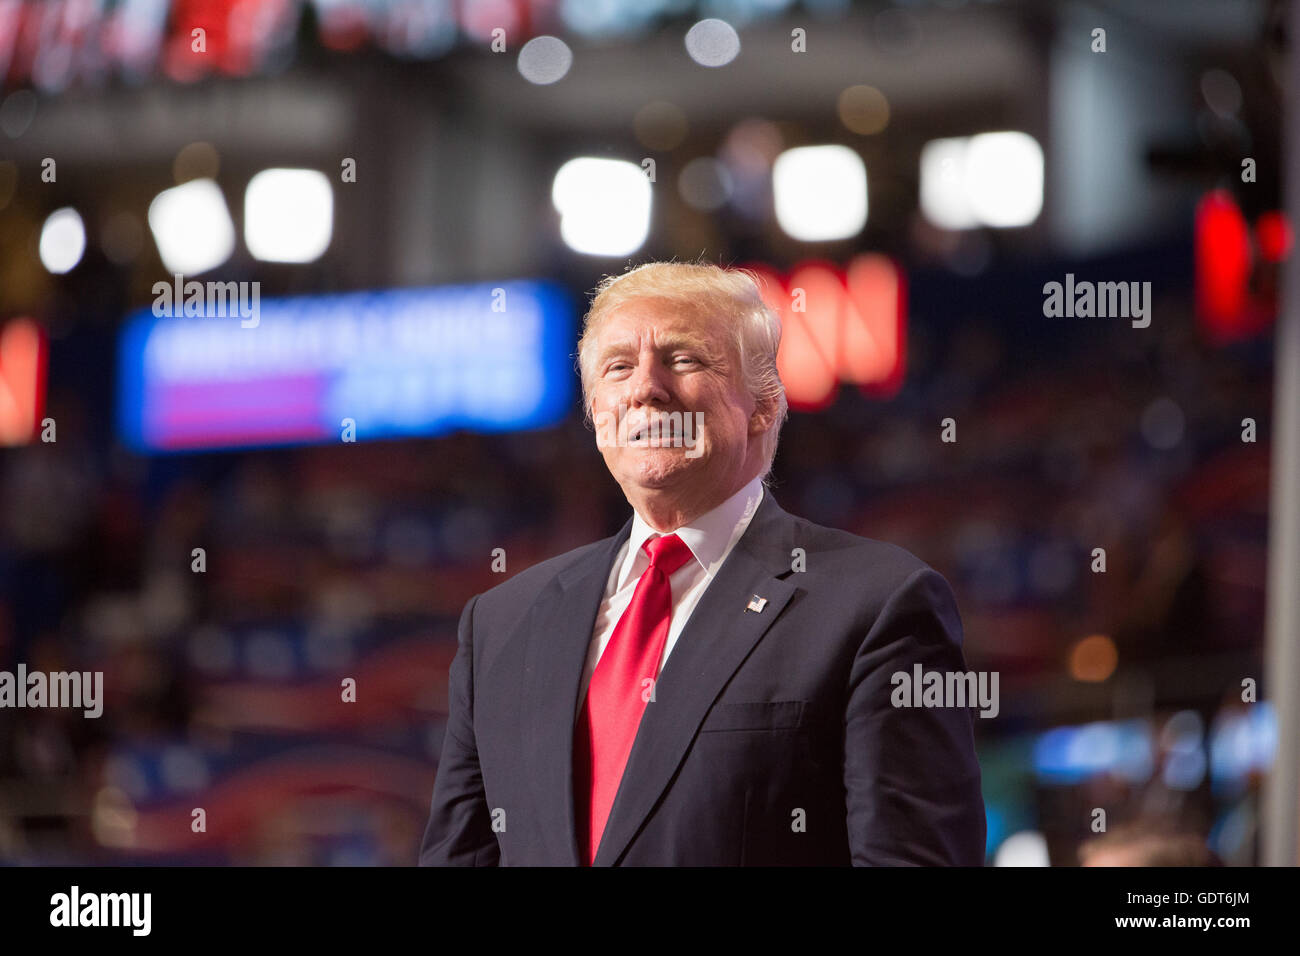 Cleveland, Ohio, USA; July 21, 2016: Donald J. Trump accepts the nomination to run for president at the Republican National Convention. (Philip Scalia/Alamy Live News) Stock Photo